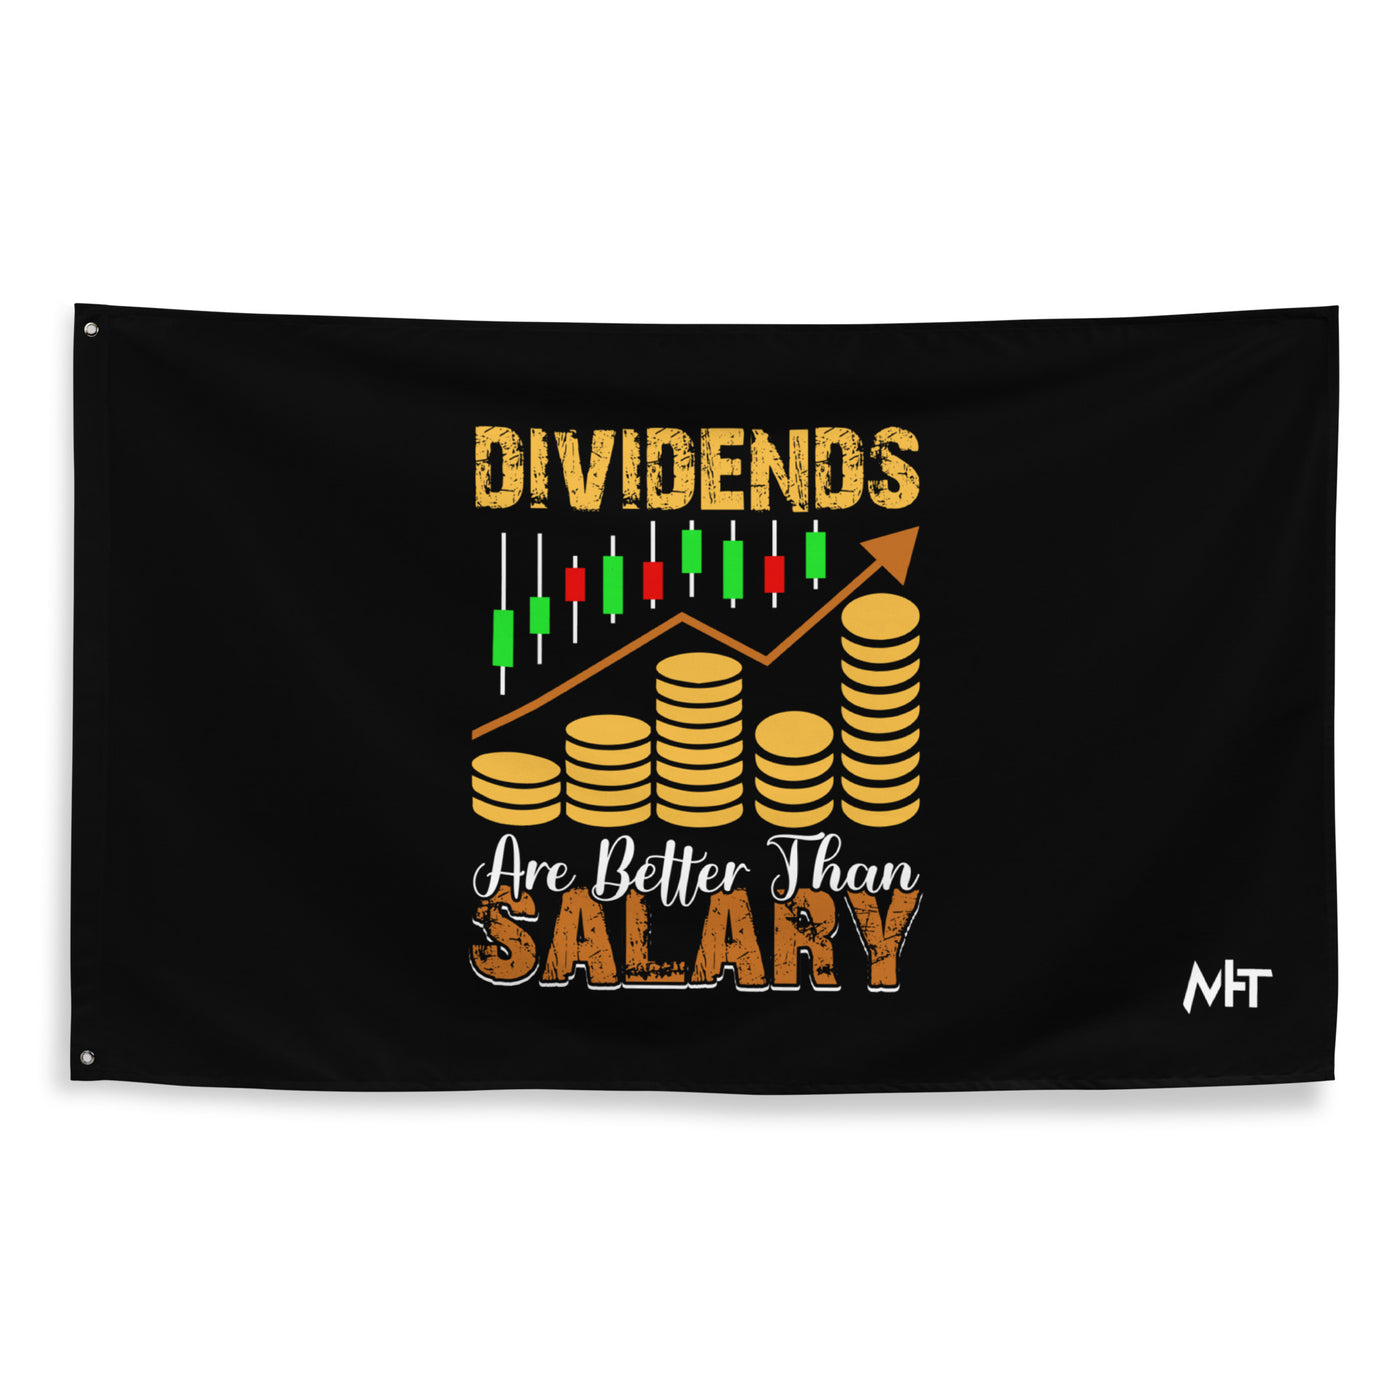 Dividends are Better than Salary - Flag